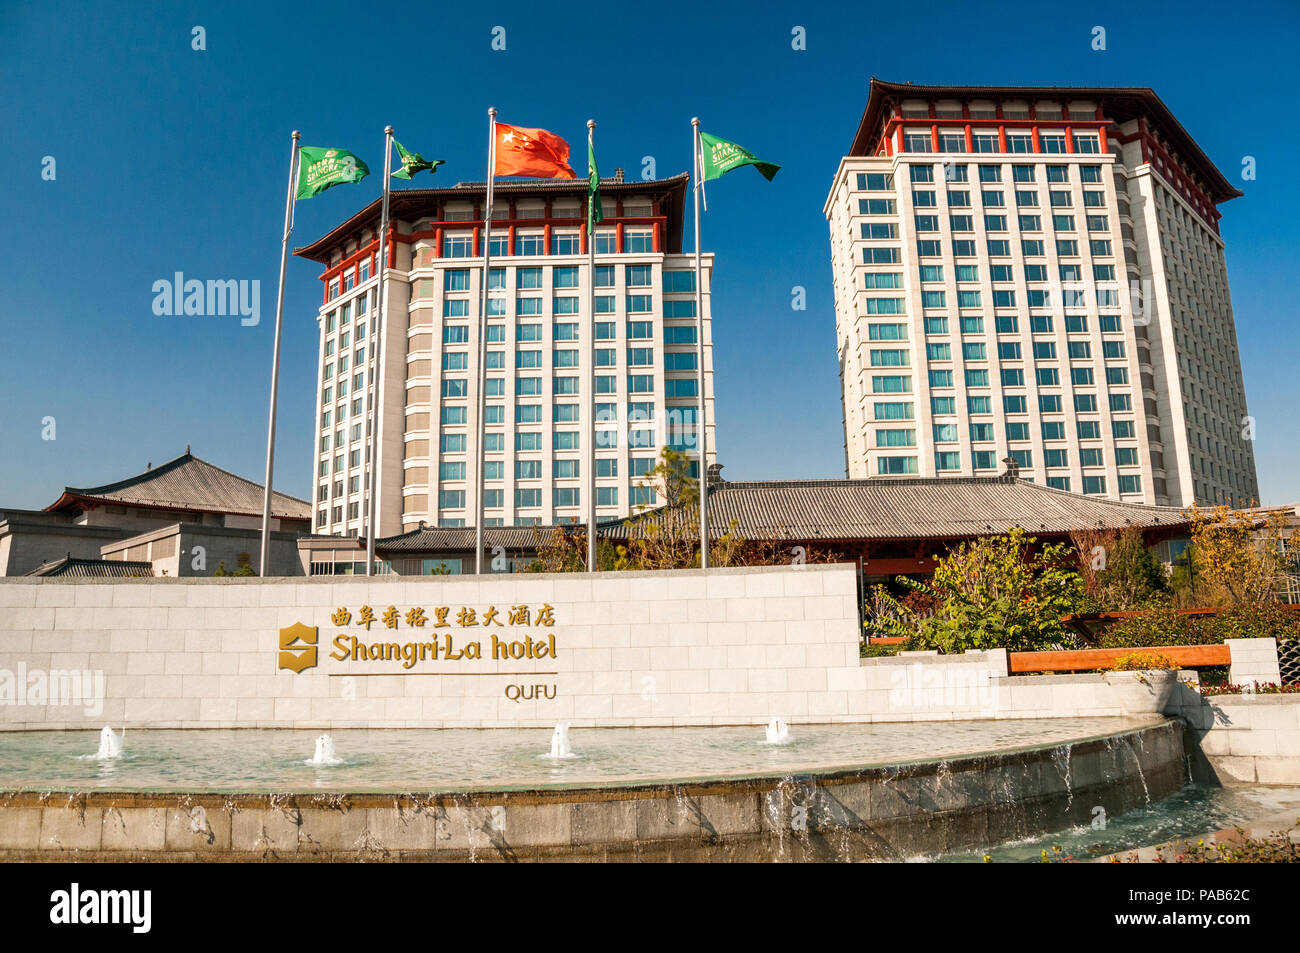 Front of the Shangri-la Hotel Qufu in Shandong Province, China. Stock Photo